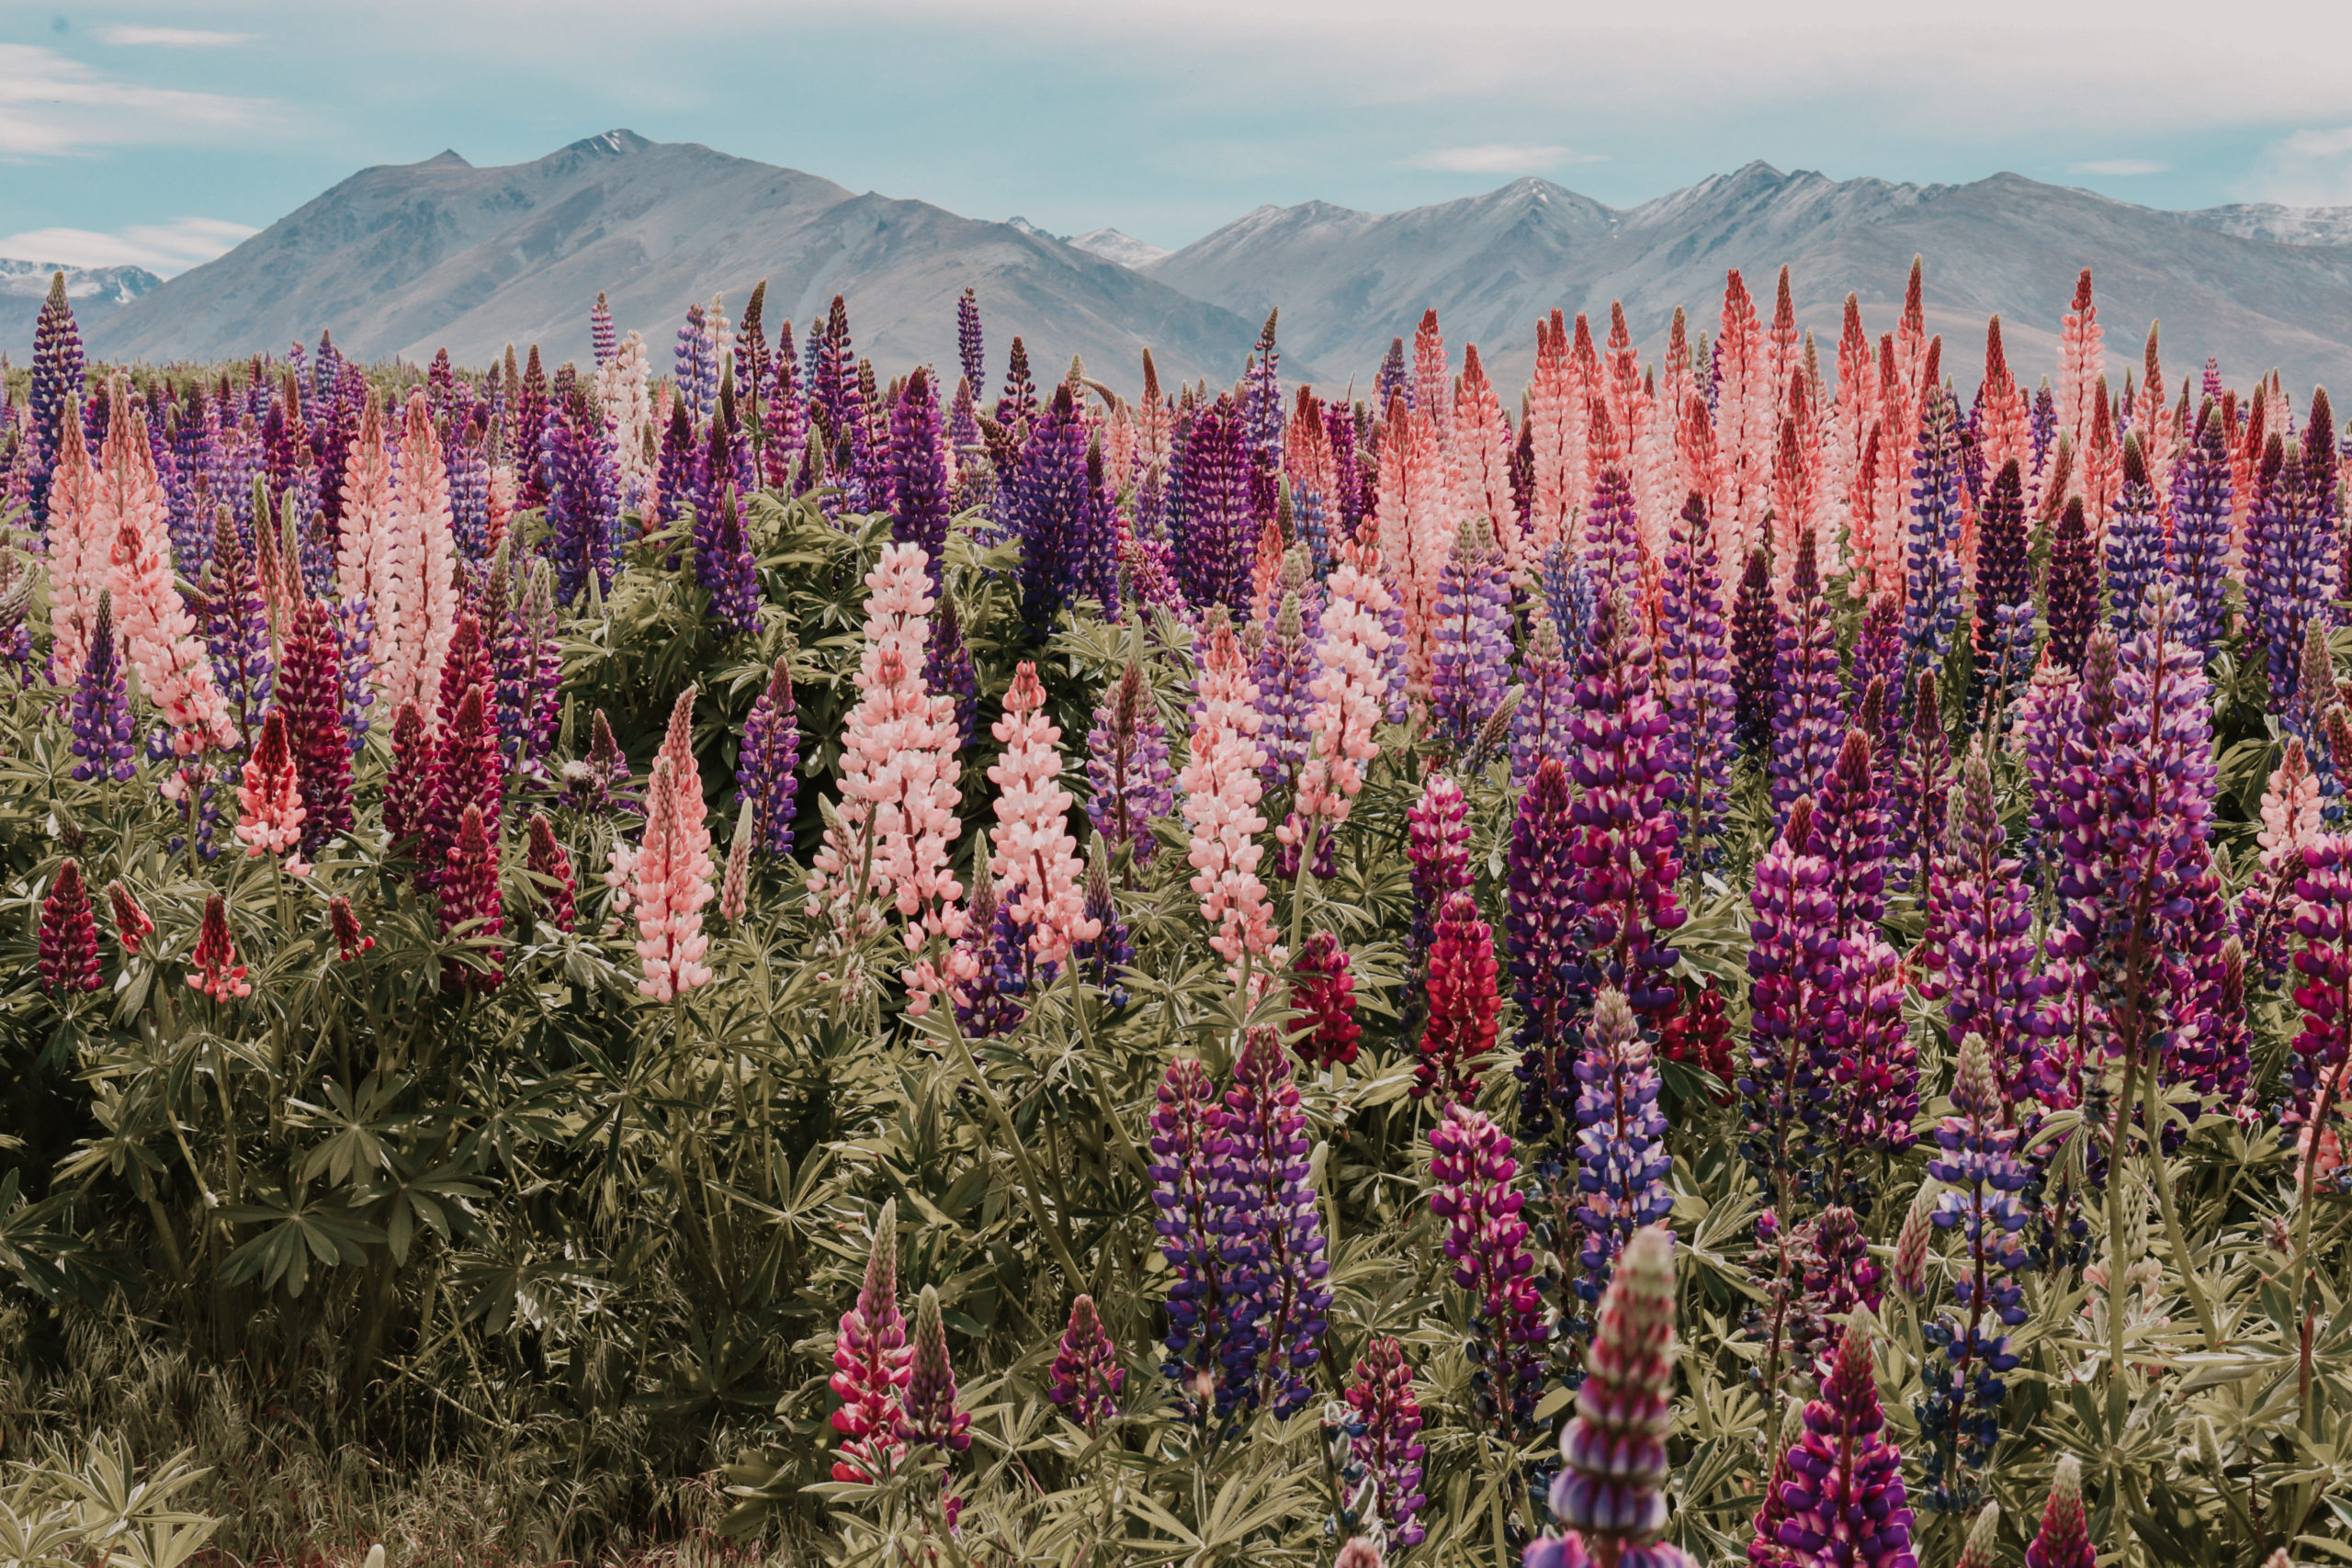 Where to see the lupins in New Zealand - Tekapo